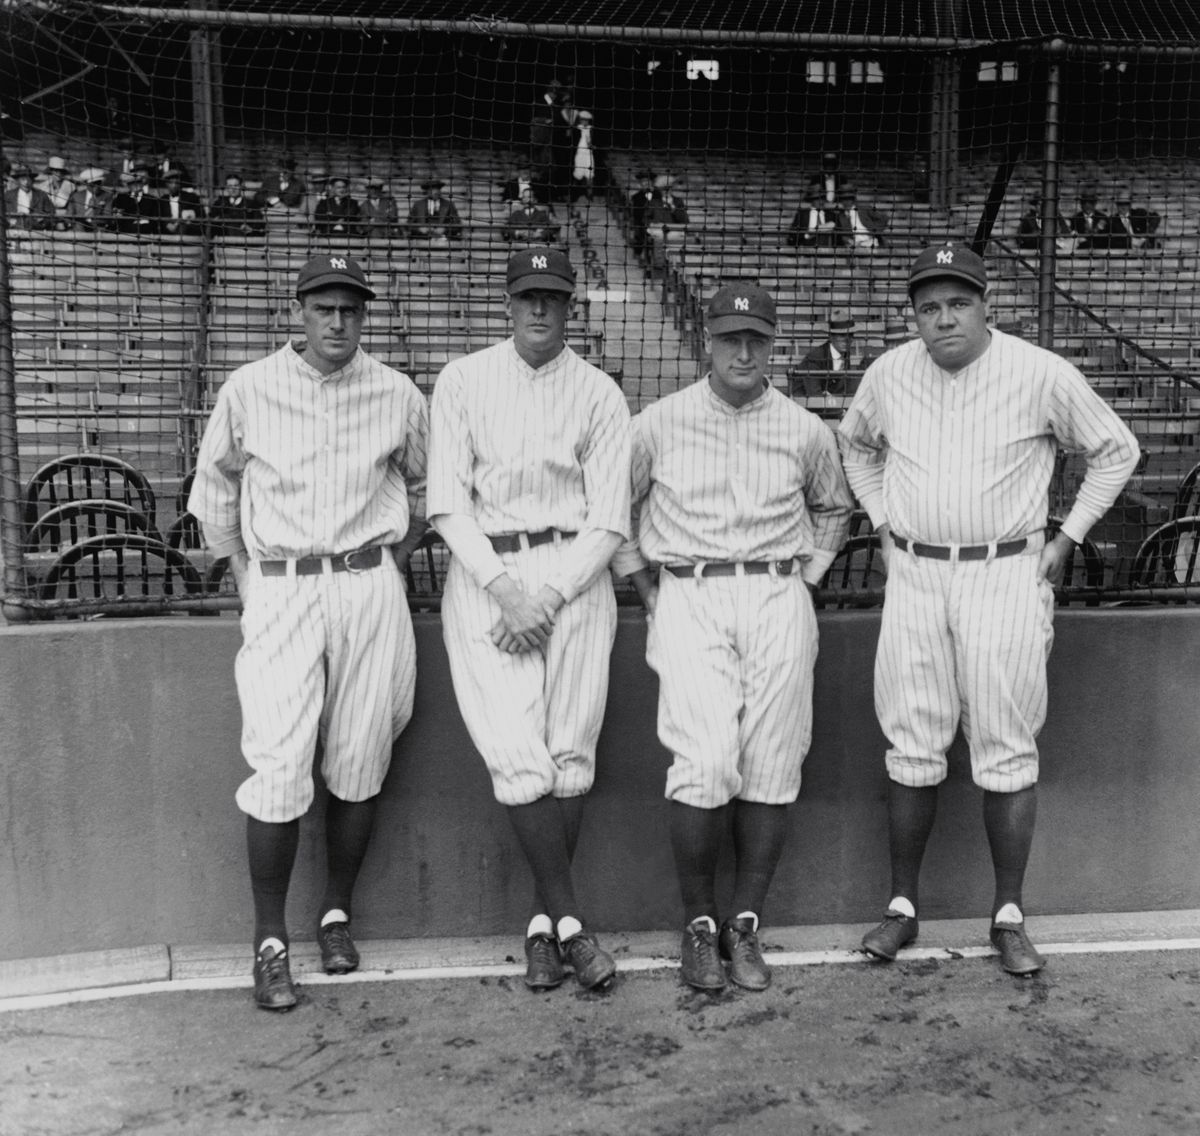 Earle Combs, Bob Meusel, Lou Gehrig and Babe Ruth